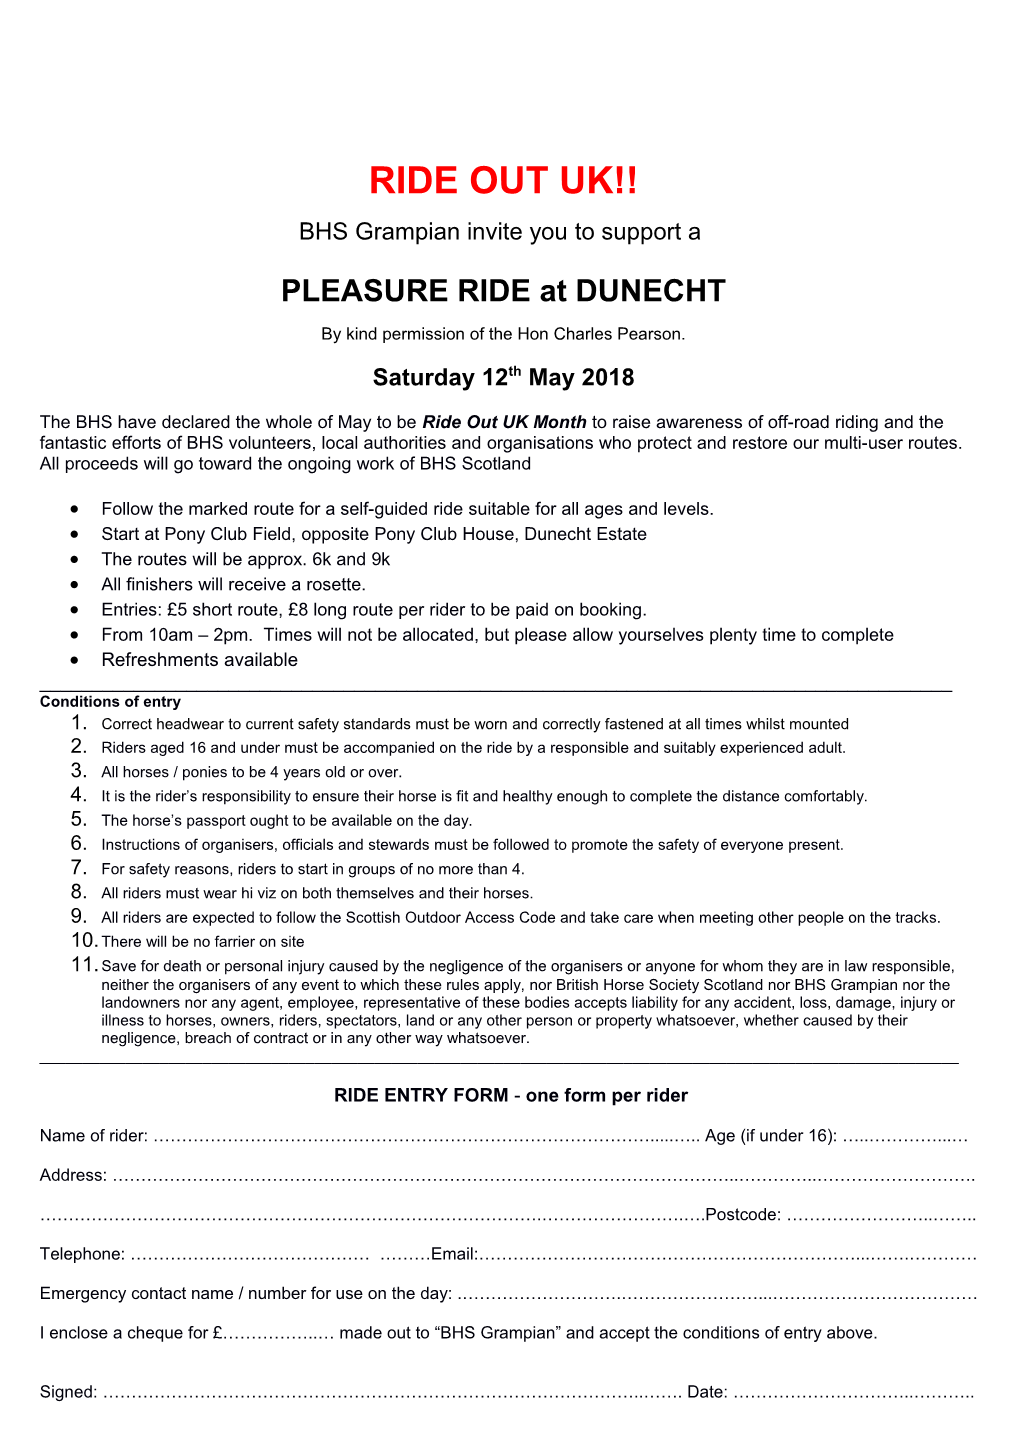 The BHS Have Declared the Whole of May to Be Ride out UK Month to Raise Awareness of Off-Road